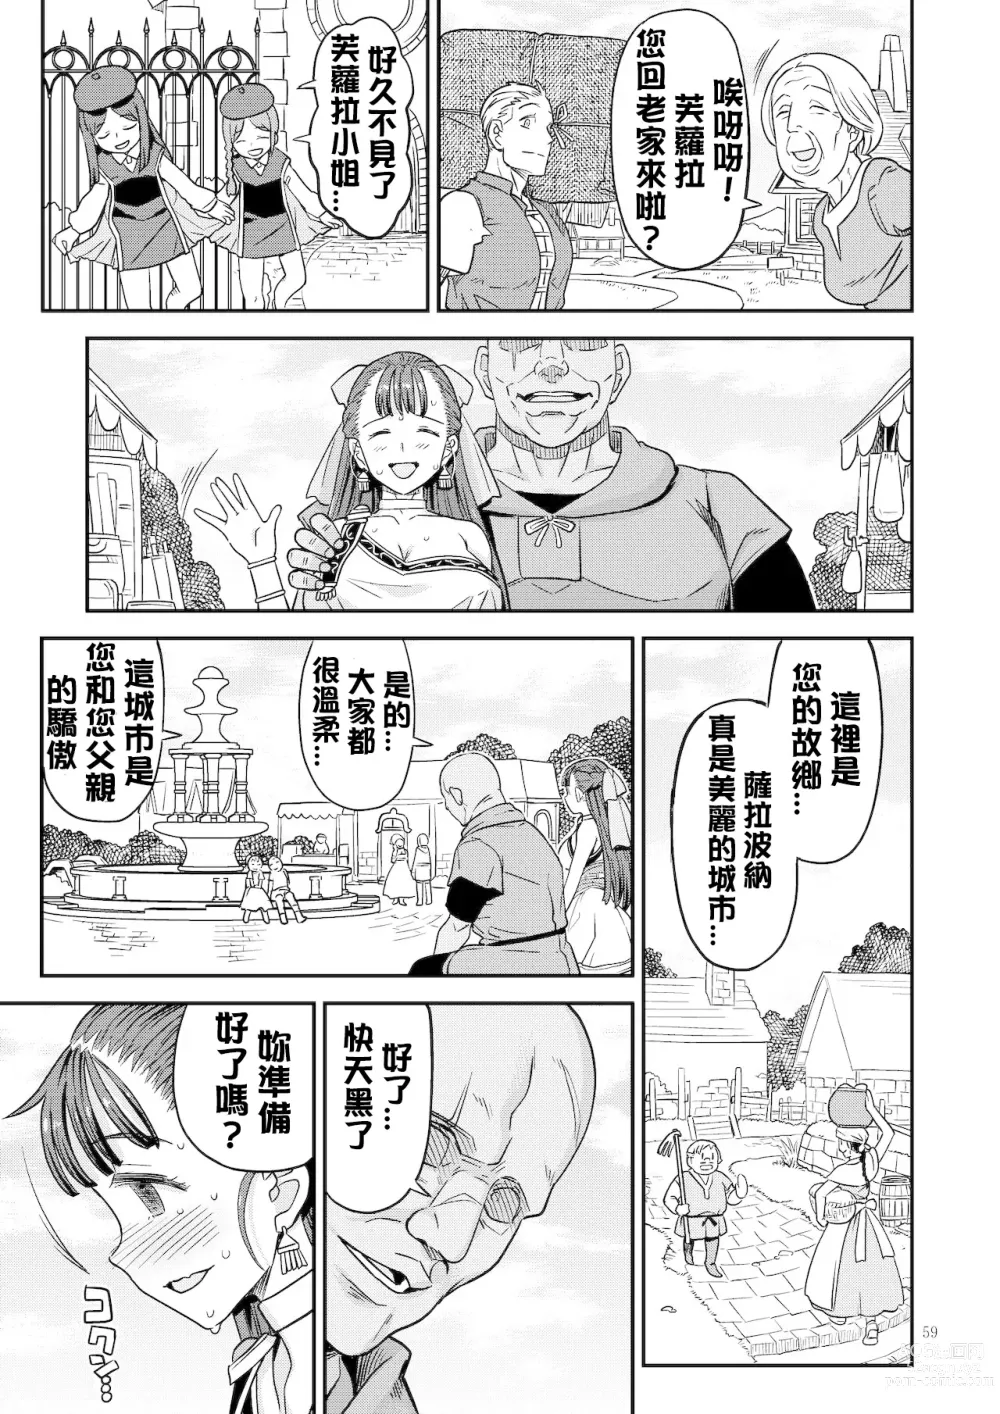 Page 16 of doujinshi Dragon Quest One Thousand and One Nights (Dragon Quest) [Digital]  【Chinese】【QTE中文翻譯】